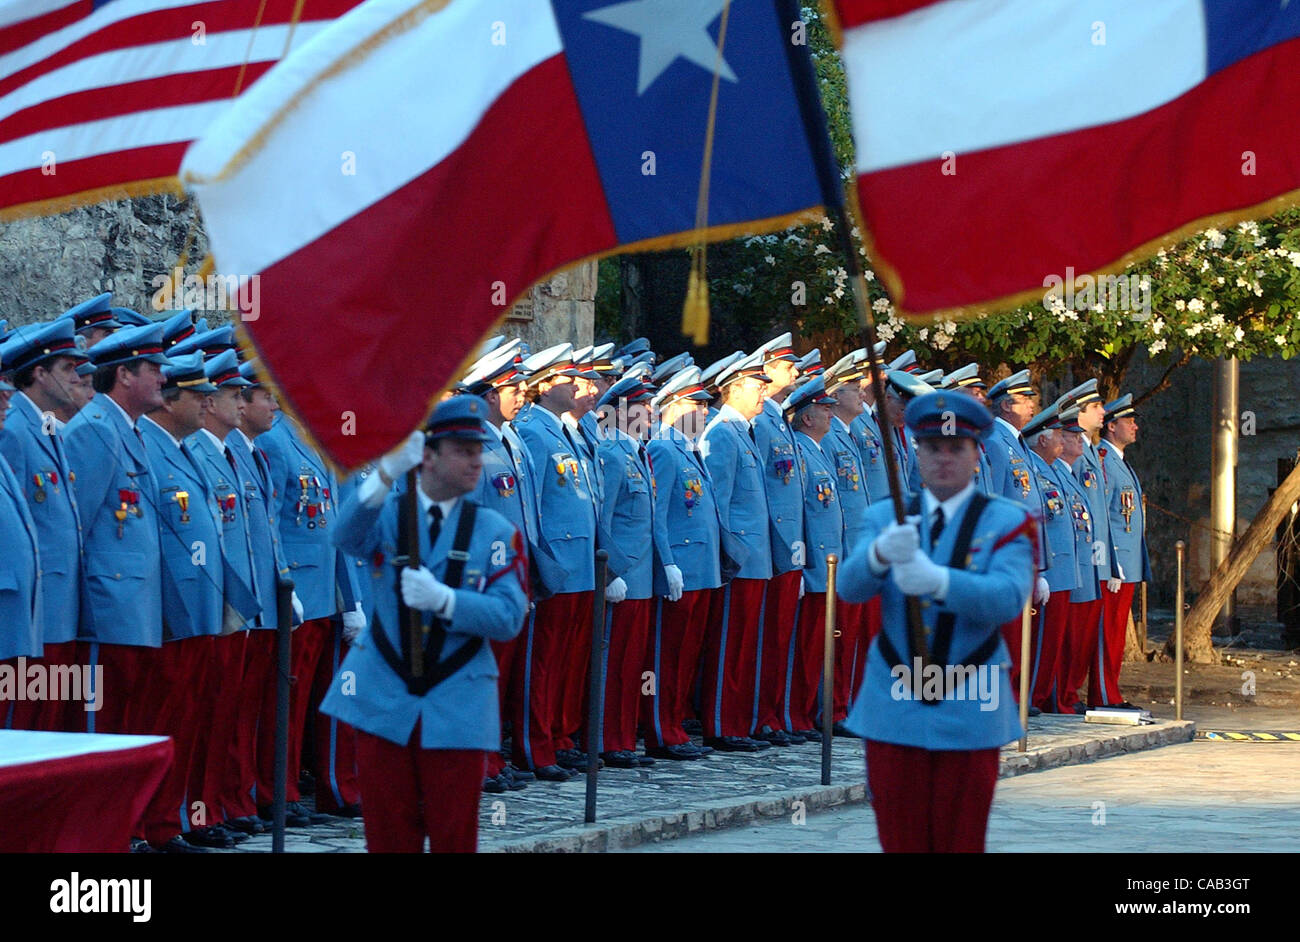 METRO Texas Cavaliers stand in formation during ceremonies for the investiture of King Antonio Saturday at the Alamo.   INVESTITURE OF KING ANTONIO AT THE ALAMO     SAM BELL STEVES II   TOM REEL/STAFF   APRIL 17, 2004. Stock Photo